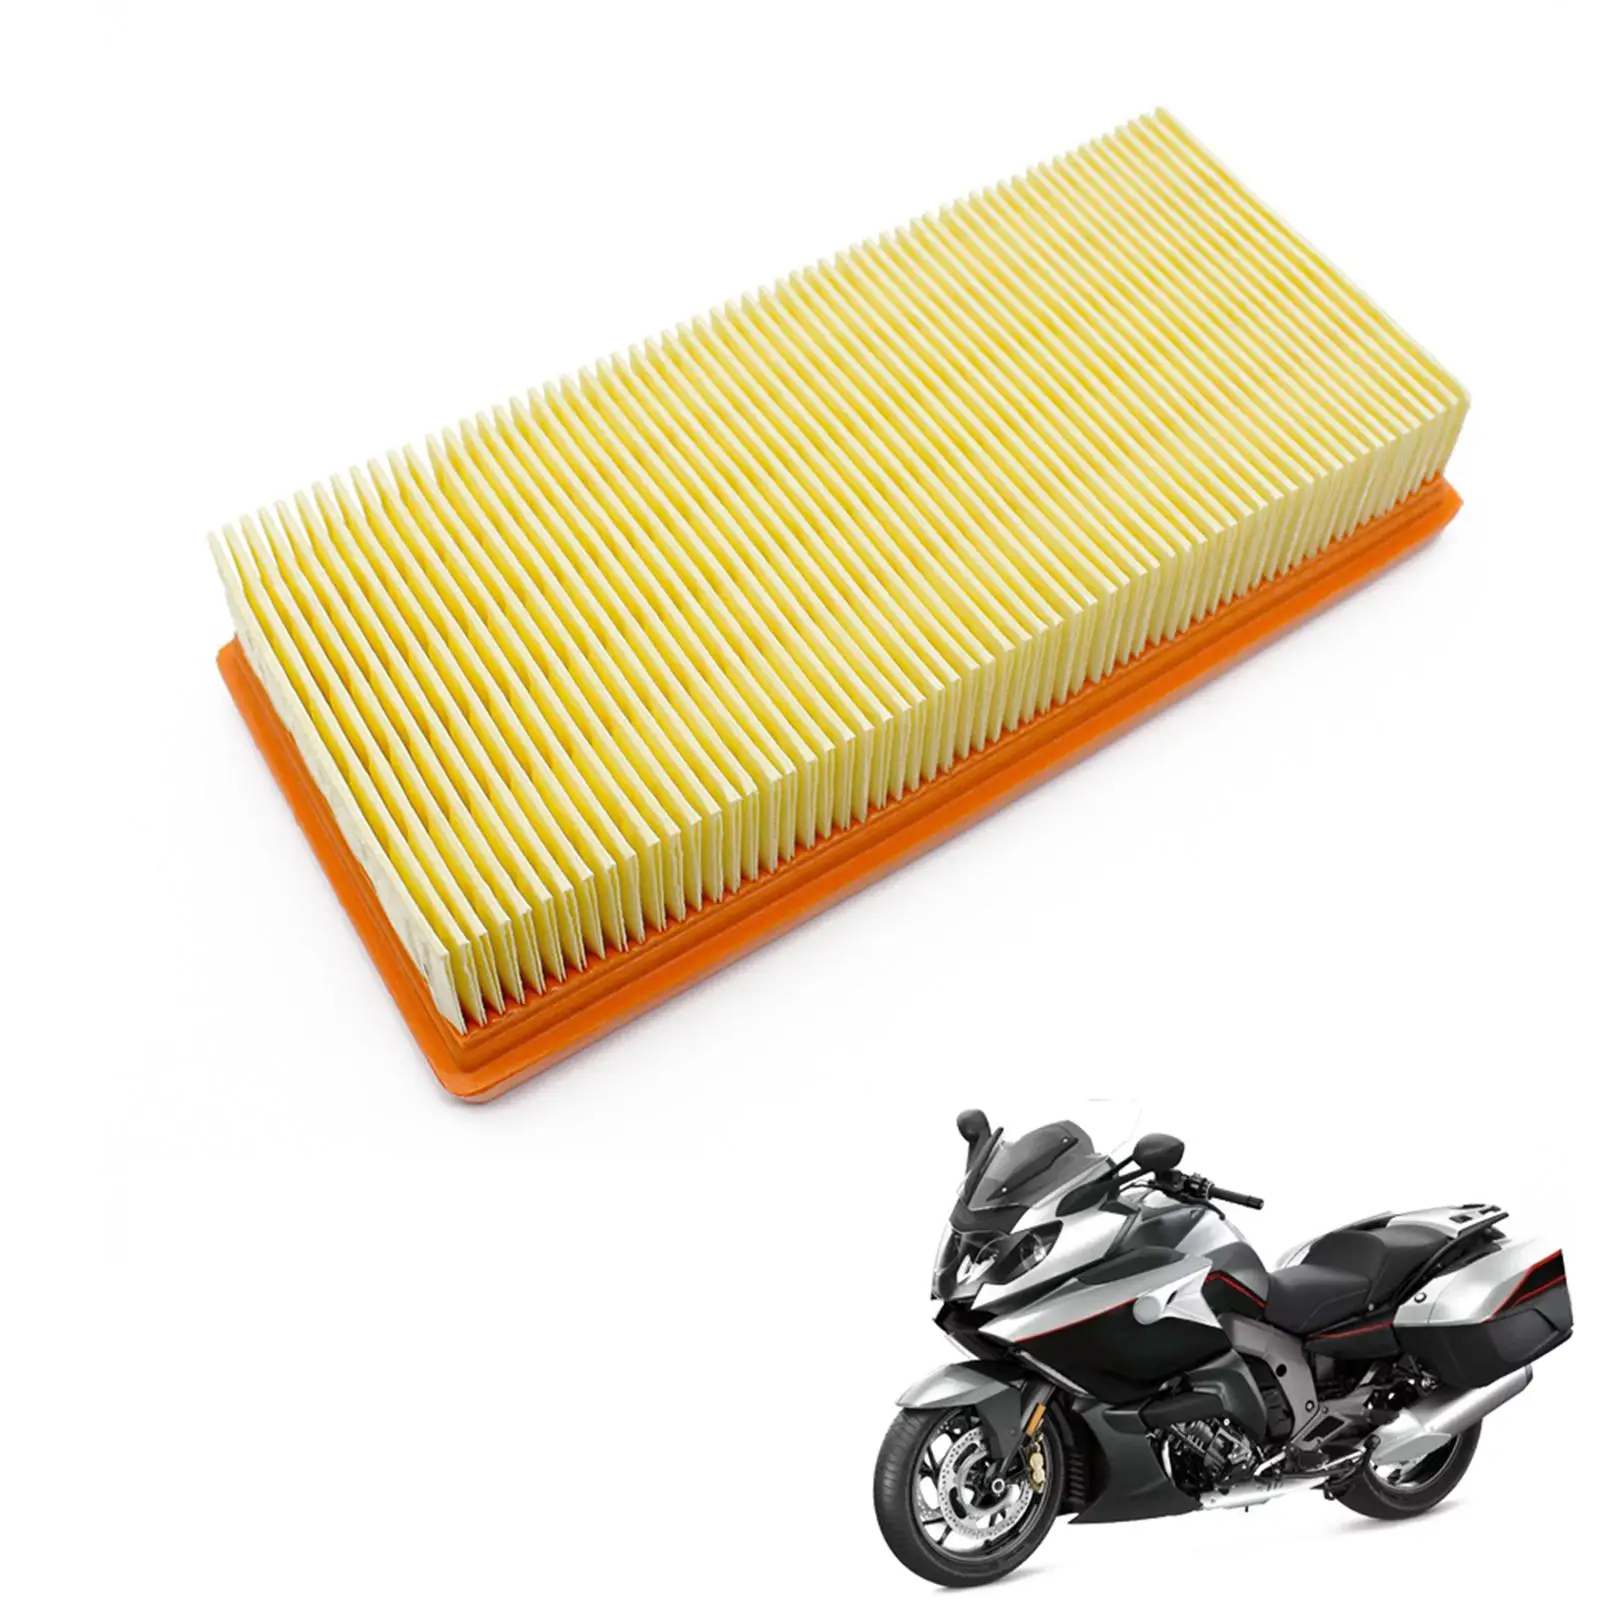 air Filter Premium Portable, Effective Easy to Install High Performance Convenient Air Filter for BMW 0GT 0Gtl